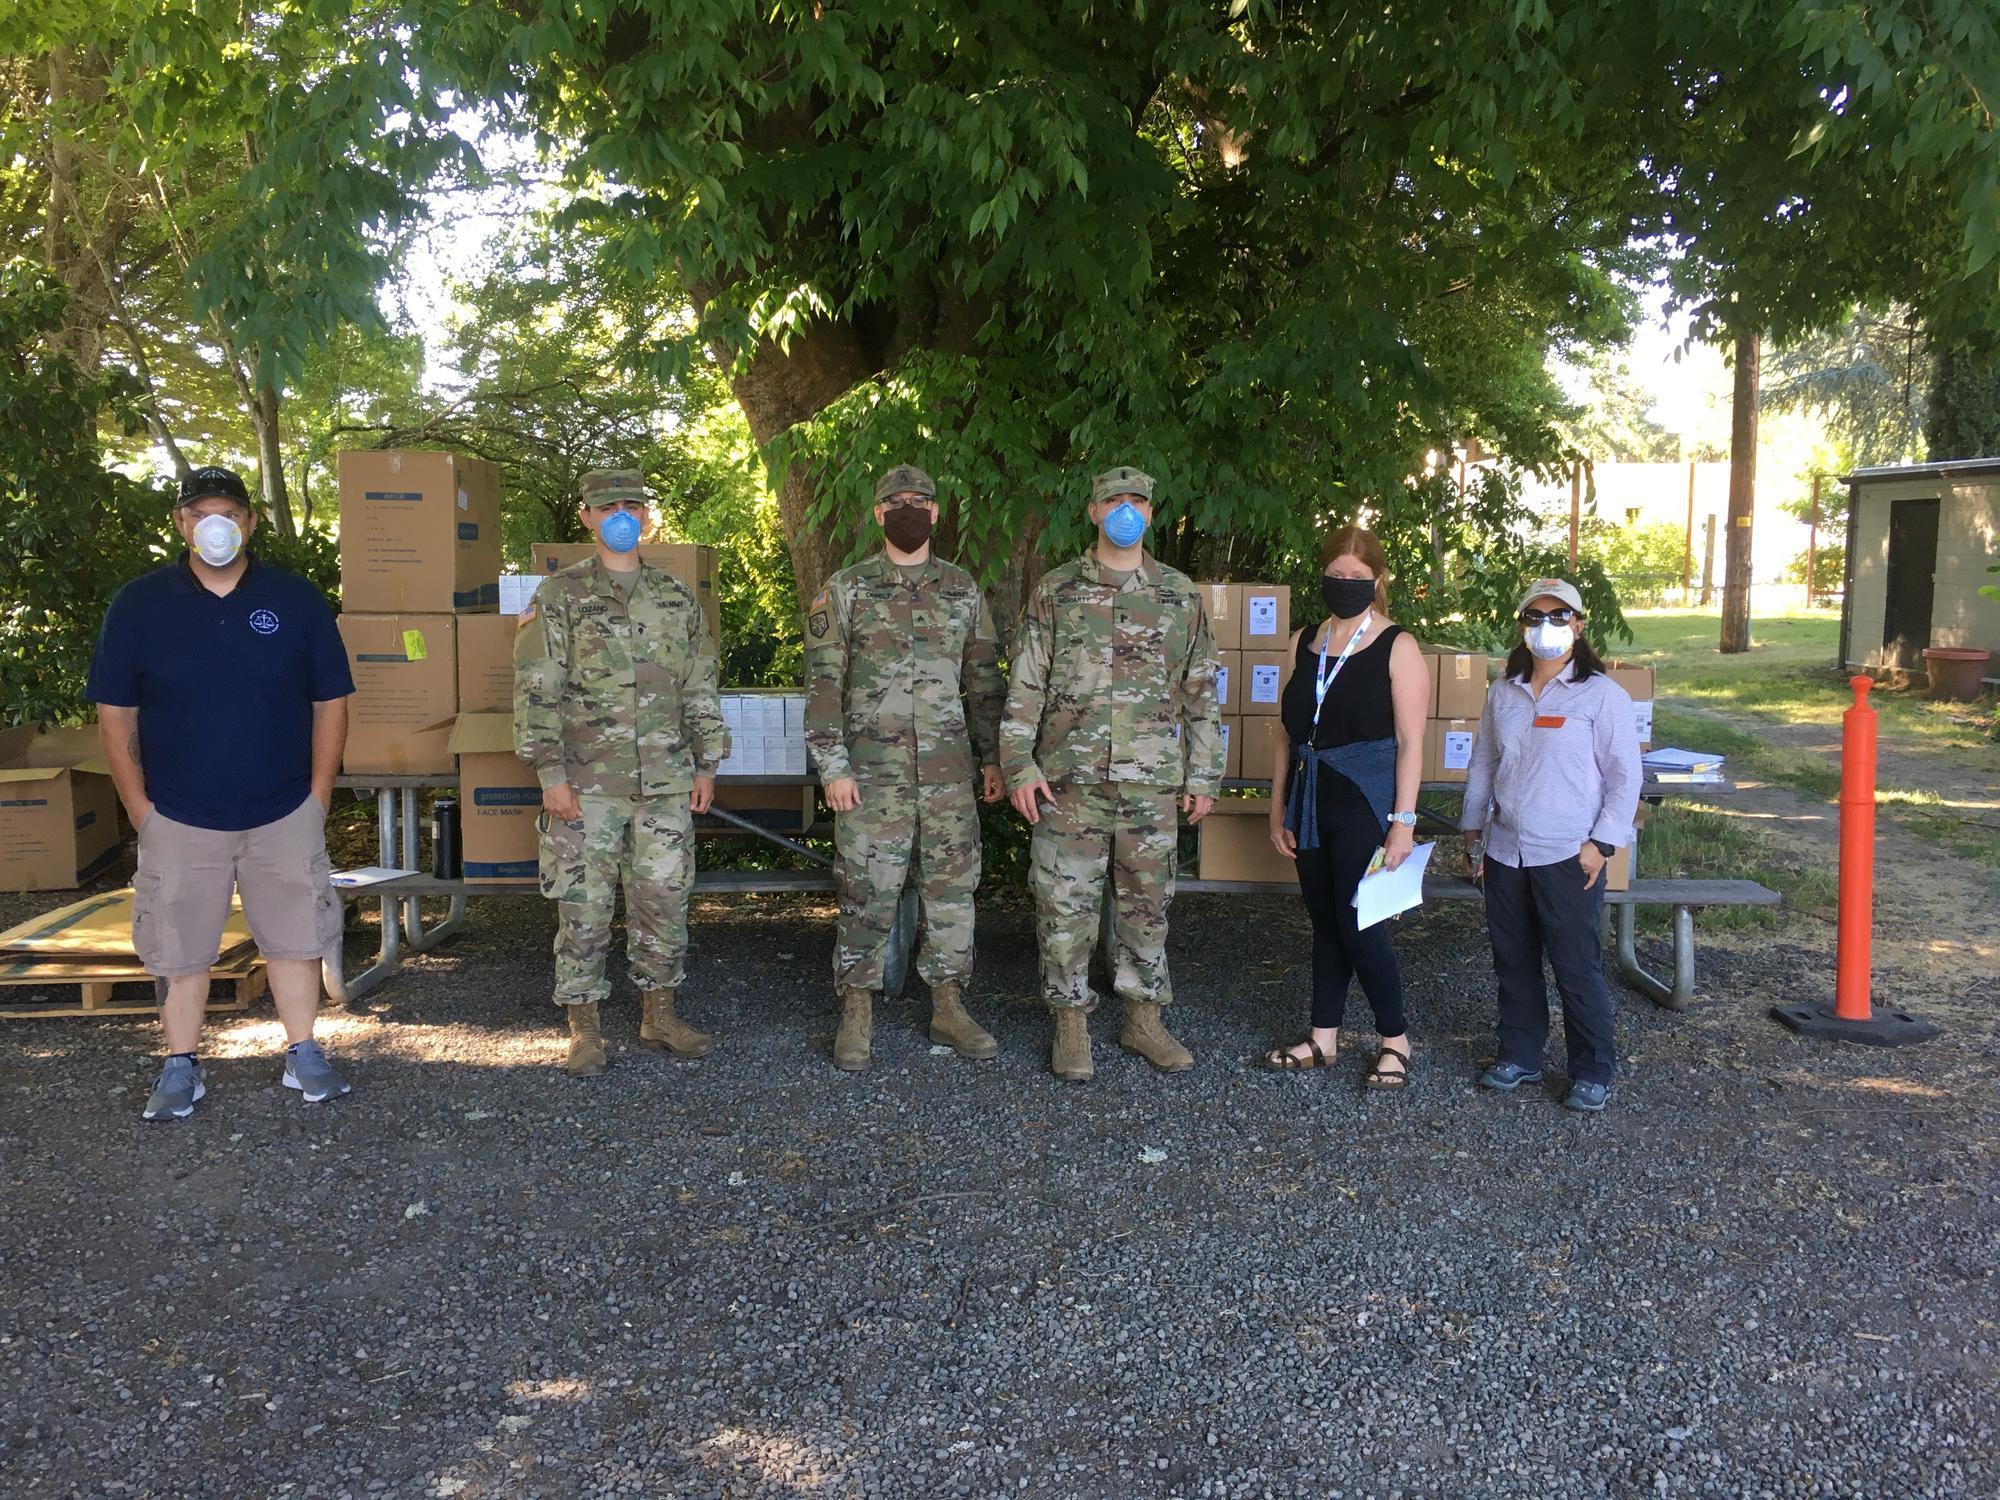 OSU Extension and Agricultural Experiment Station faculty and staff worked alongside the Oregon Army National Guard to d